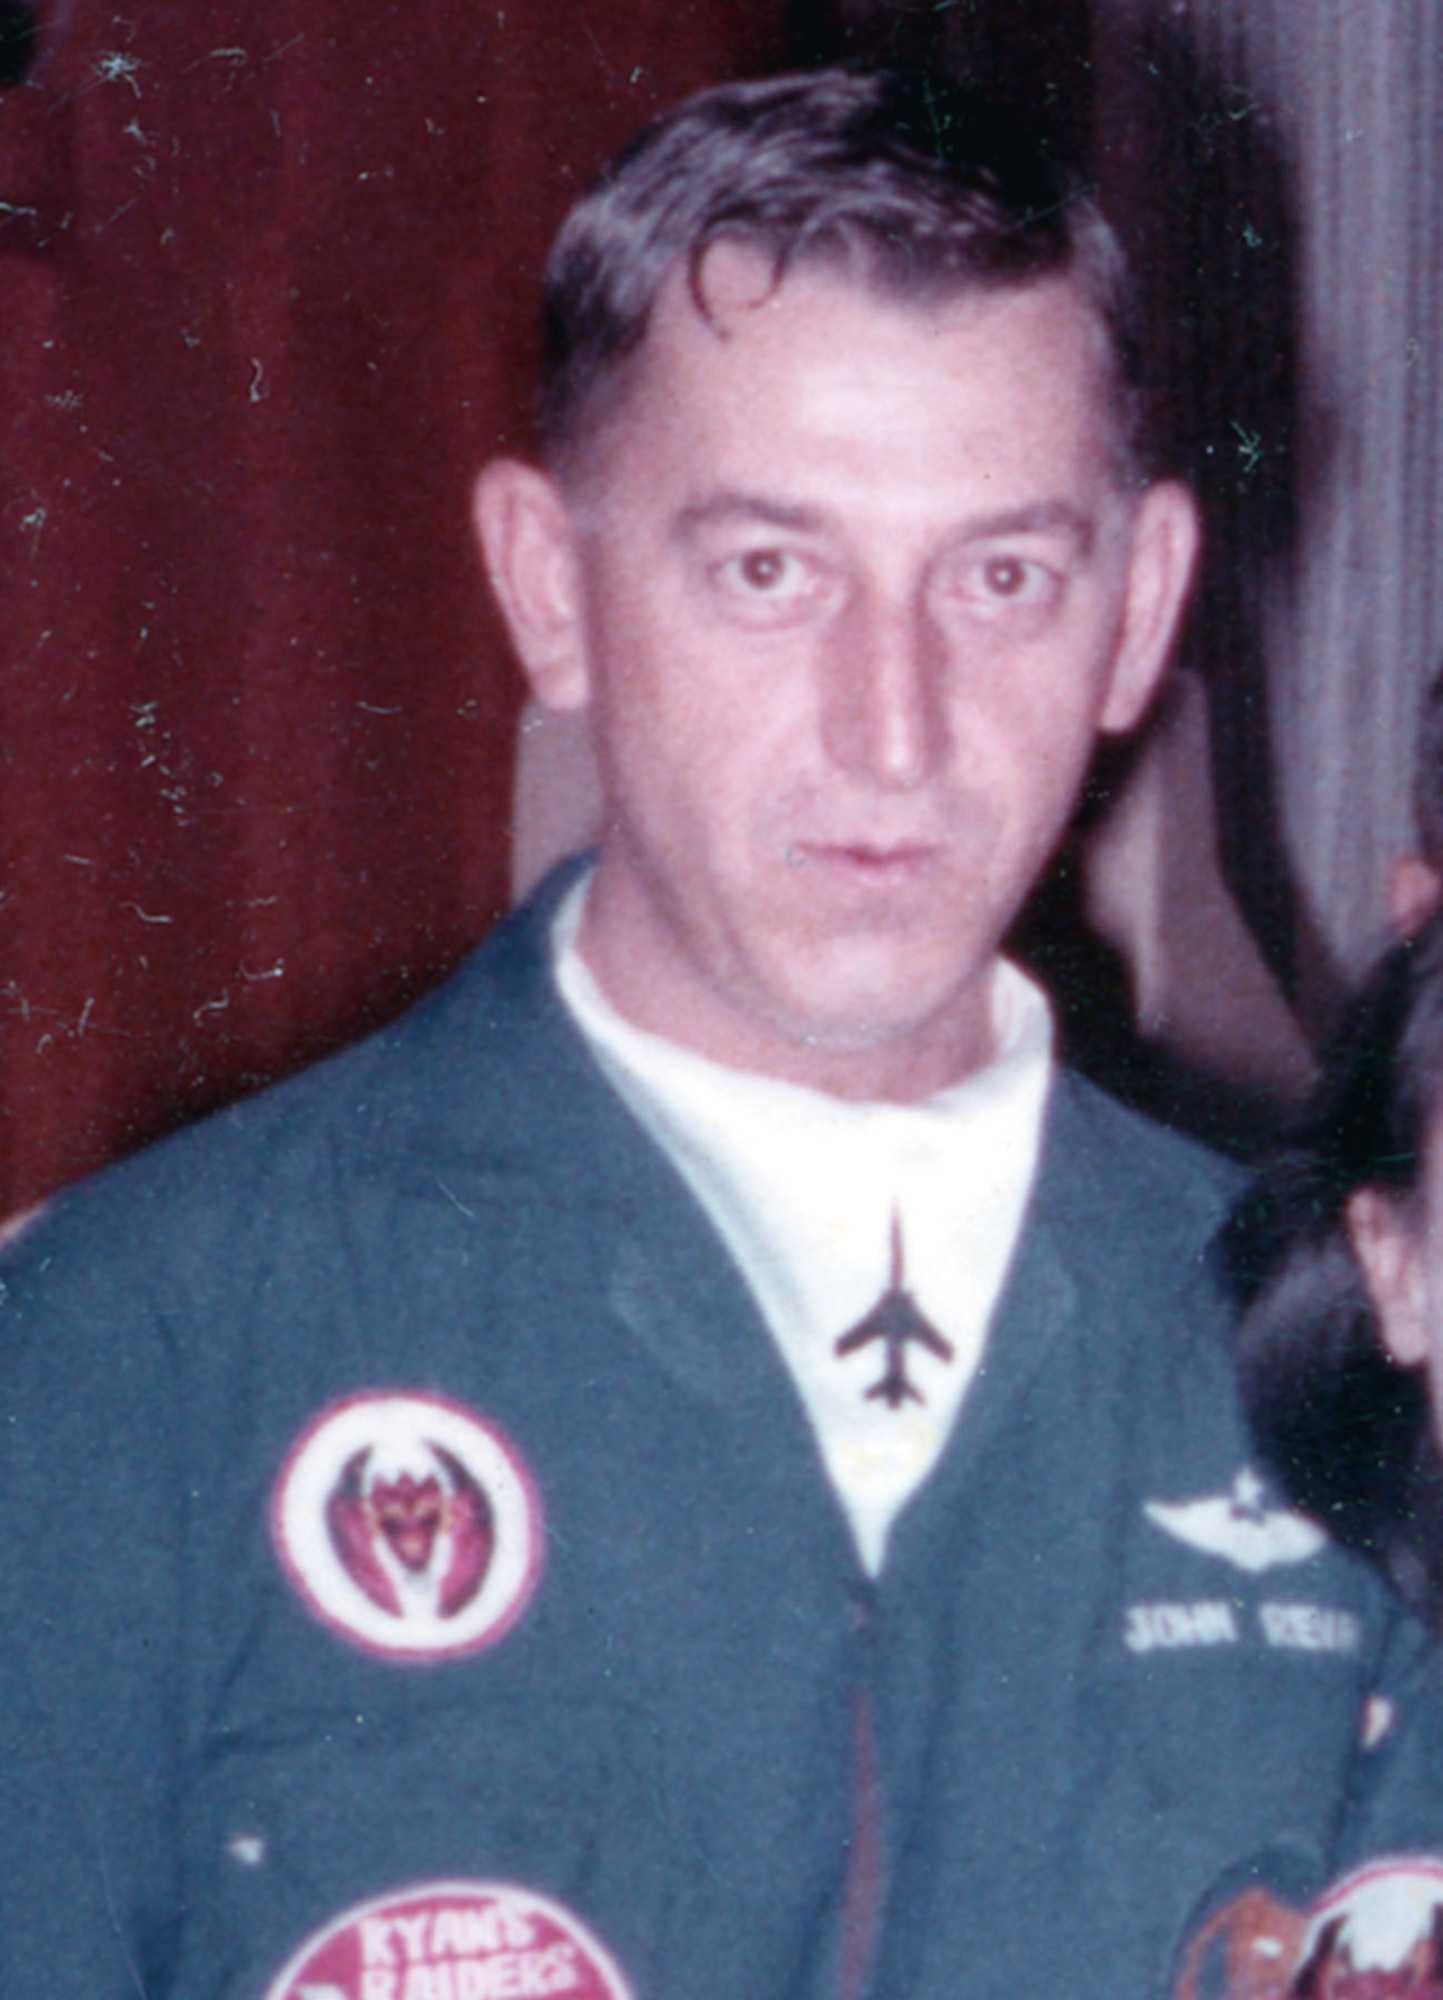 Revak in his party suit. (U.S. Air Force photo)